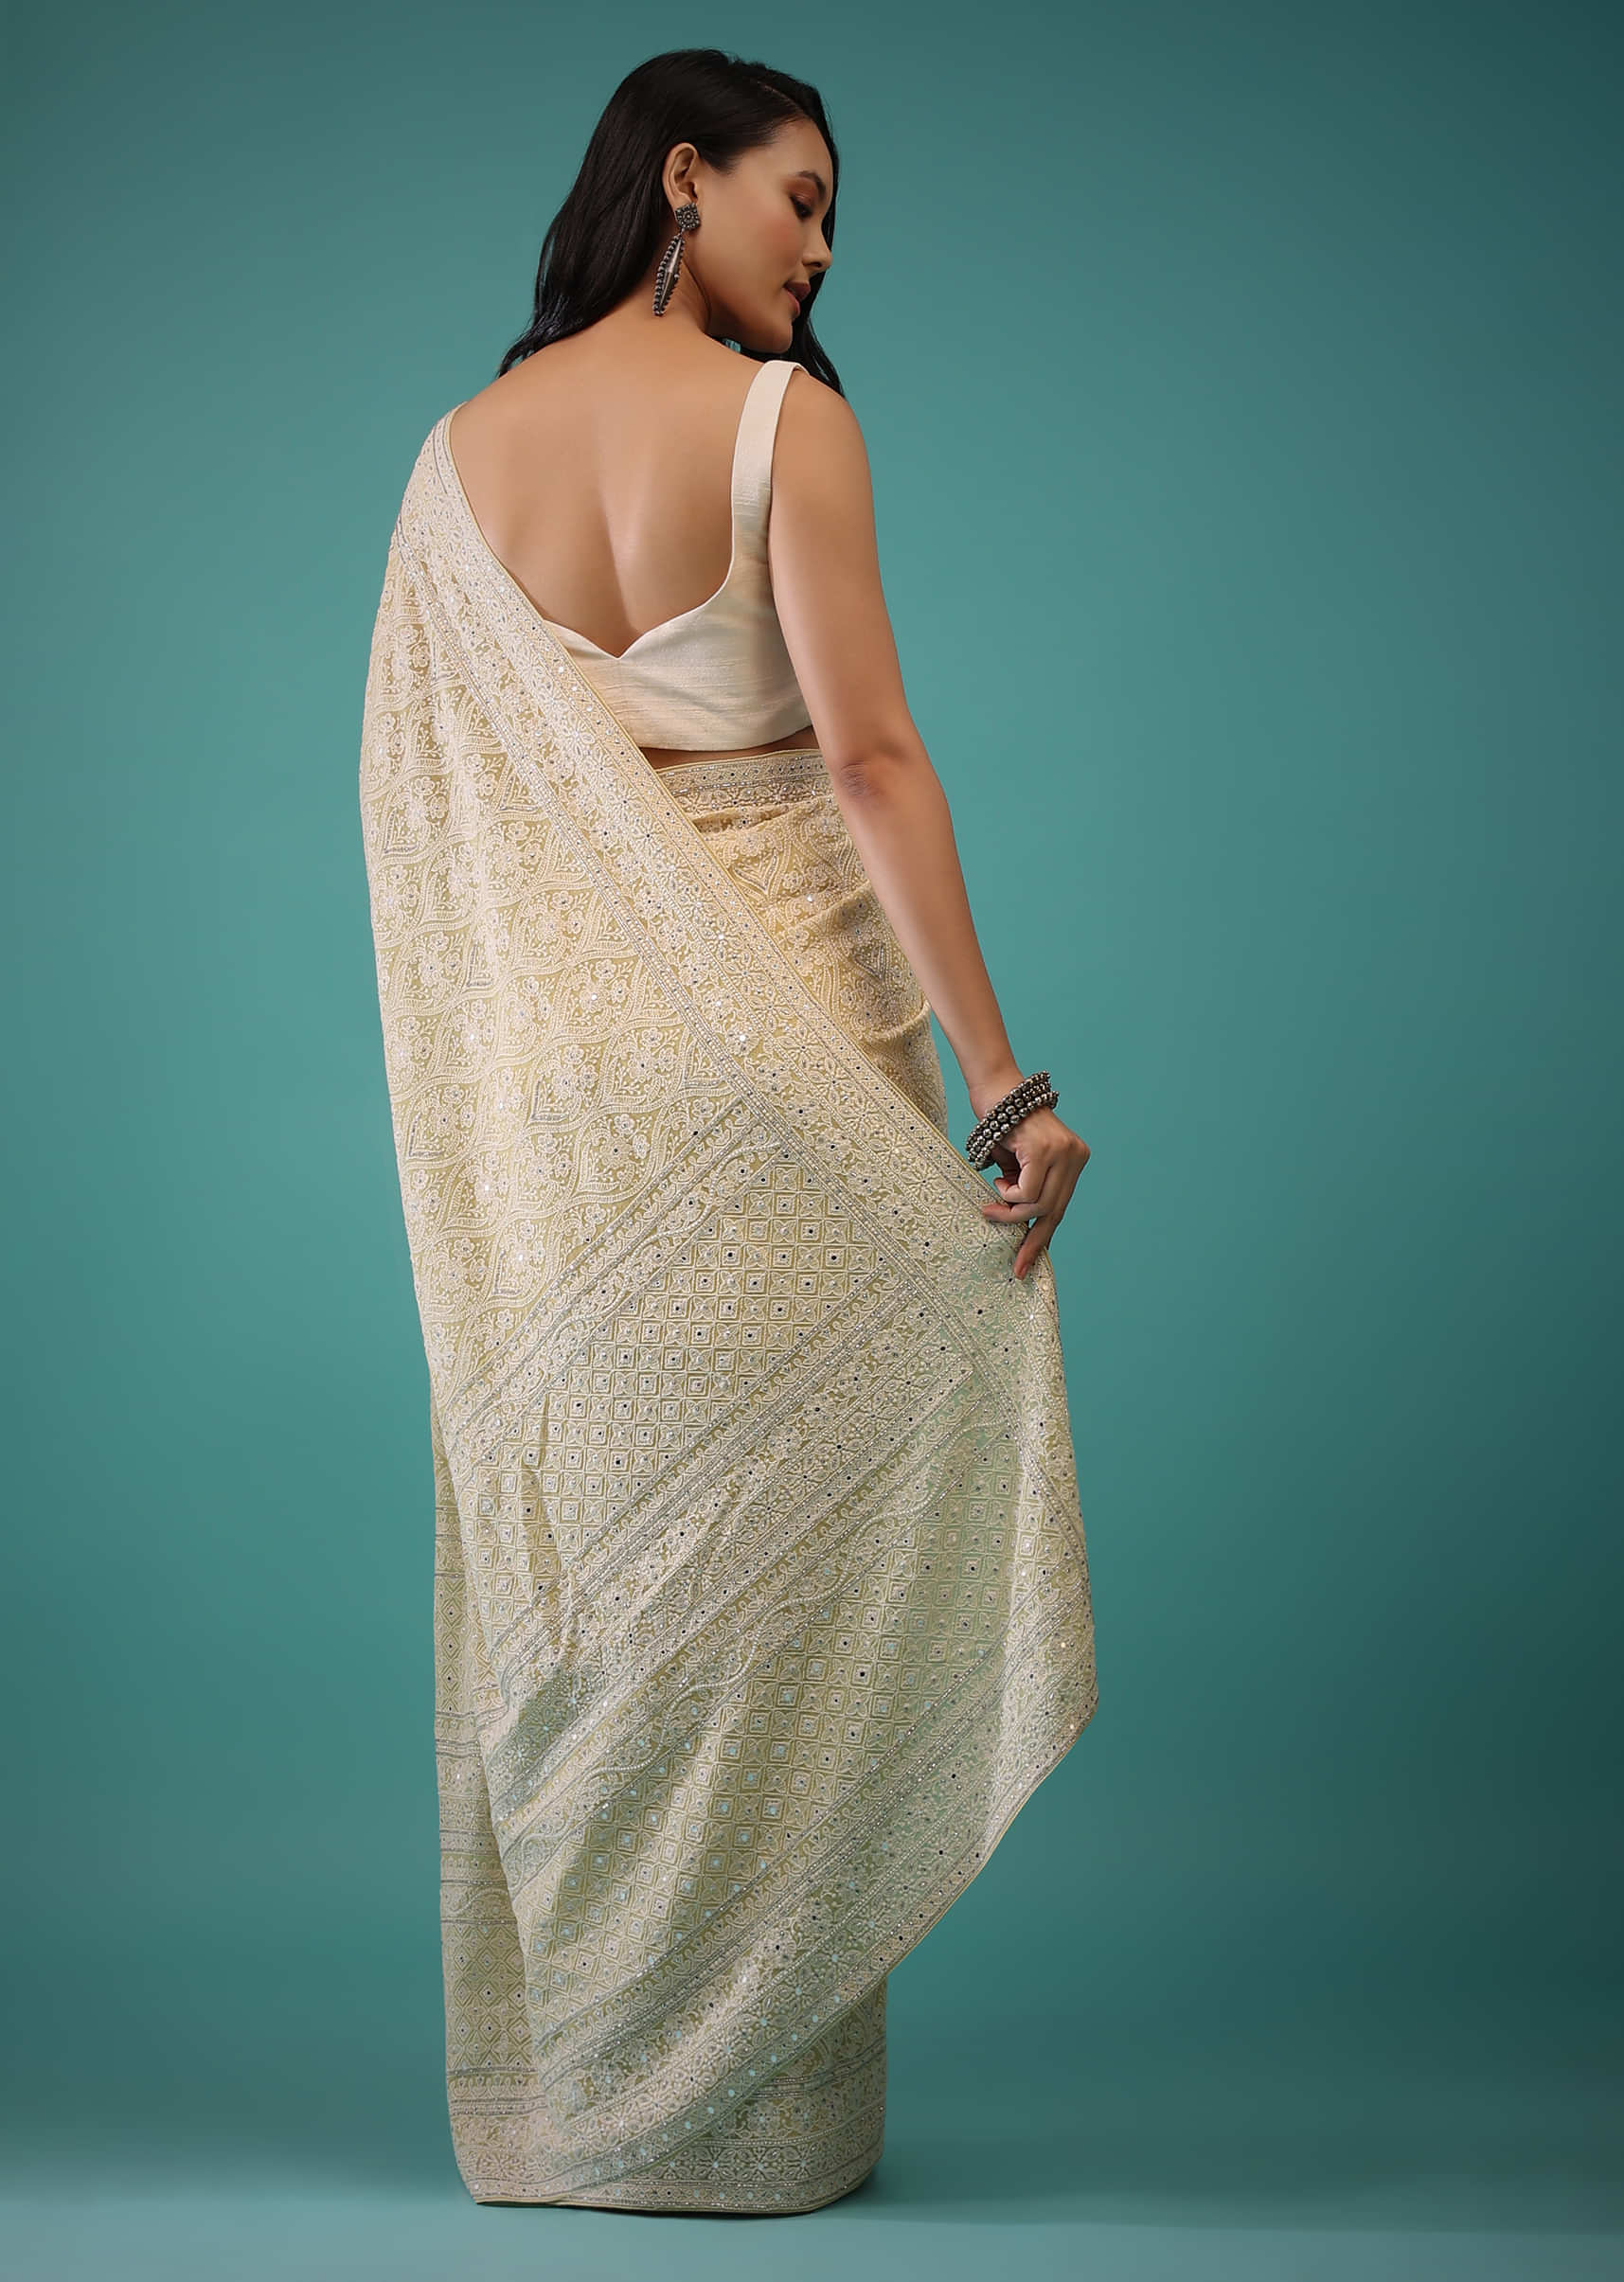 Lemon Drop Saree In Lucknowi Threadwork In A Moroccan Jaal, Mirror And Cut Dana Embroidery Detailing On The Pallu